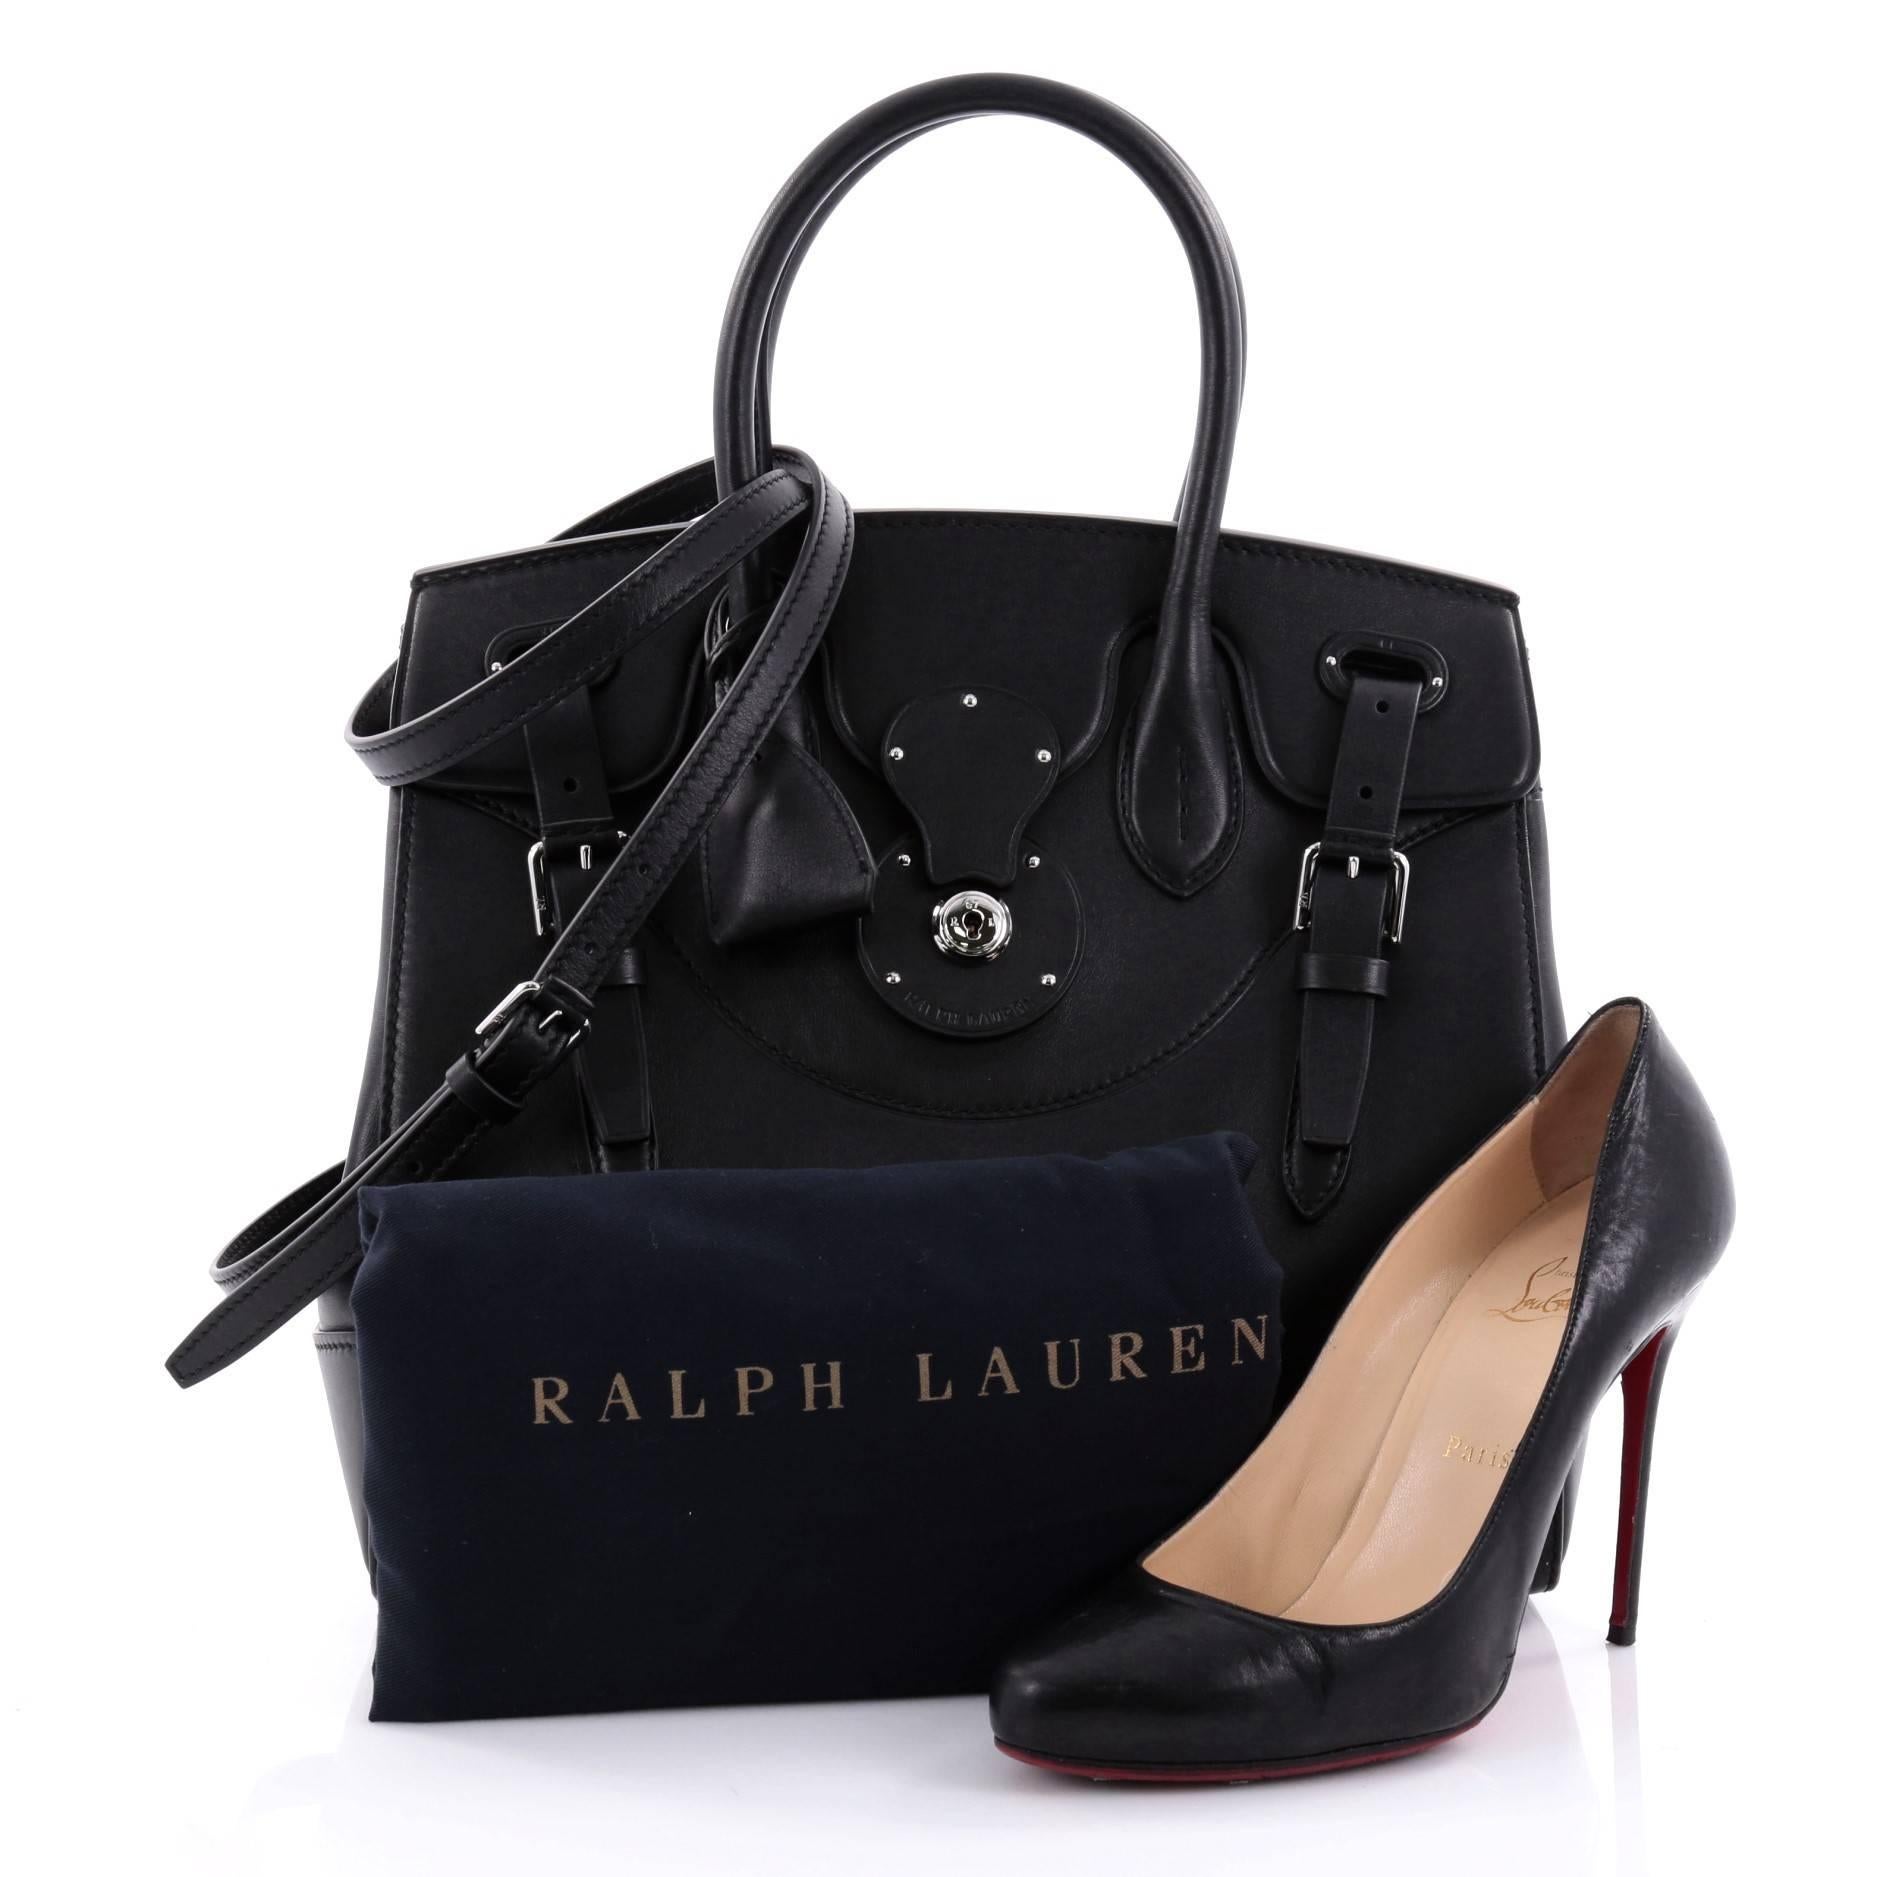 This authentic Ralph Lauren Collection Soft Ricky Handbag Leather 33 is one of the brand's most beloved styles. Crafted from black leather, this understated, elegant tote features a boxy silhouette, a folded top with a slide-lock clasp and belted